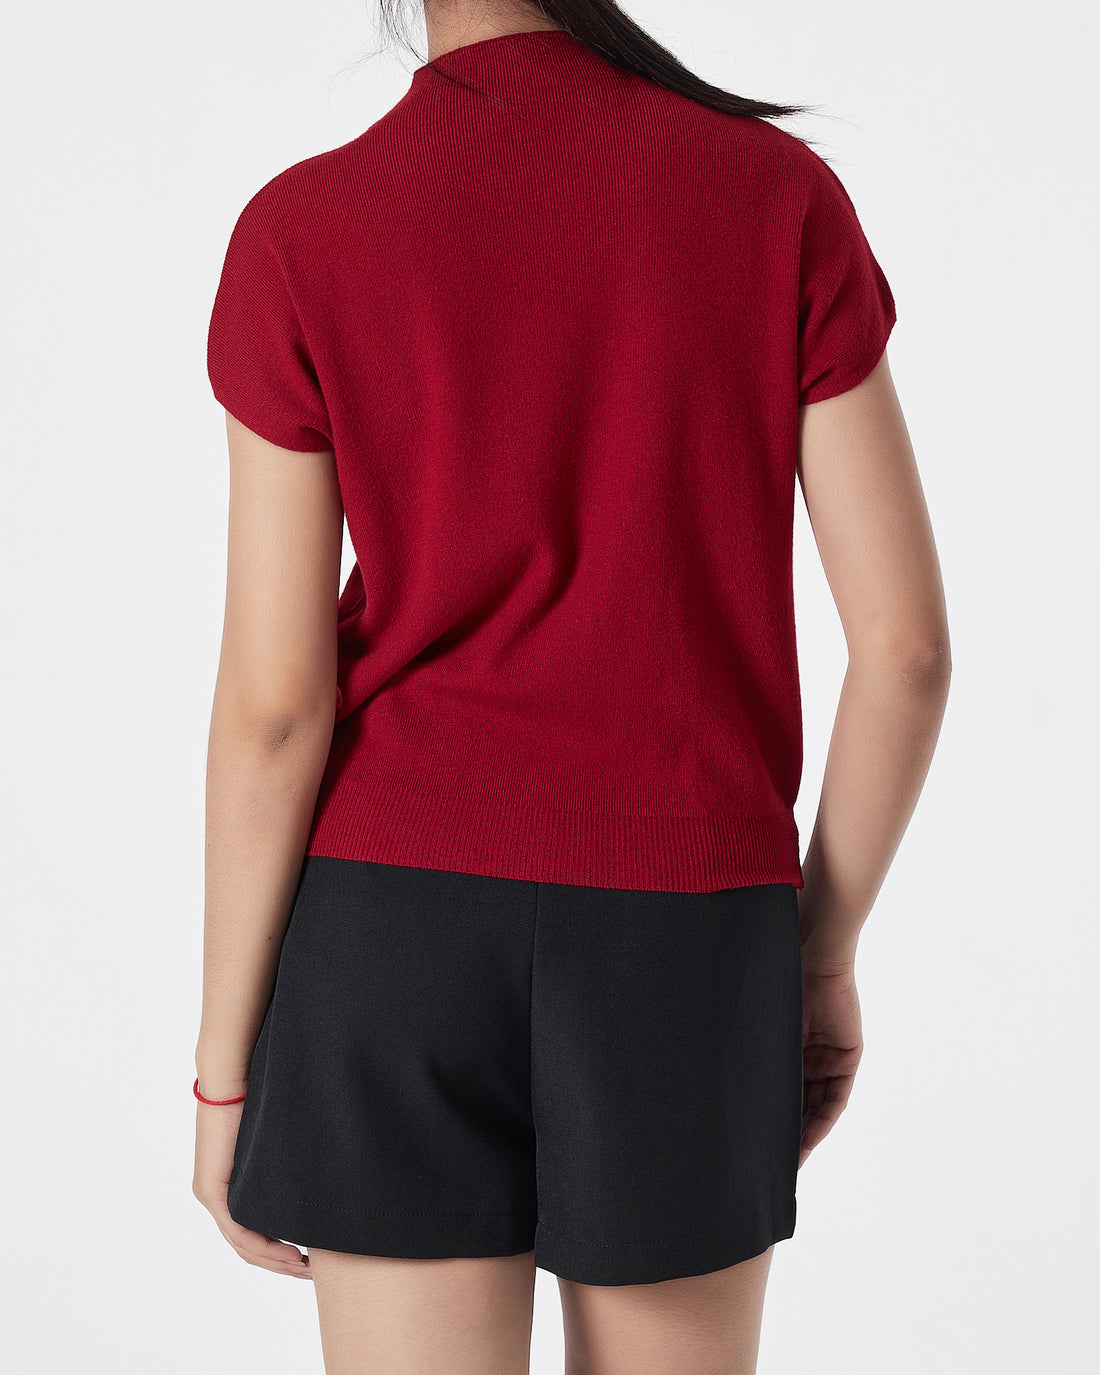 Cozy Soft Knit Lady Red T-Shirt 14.90